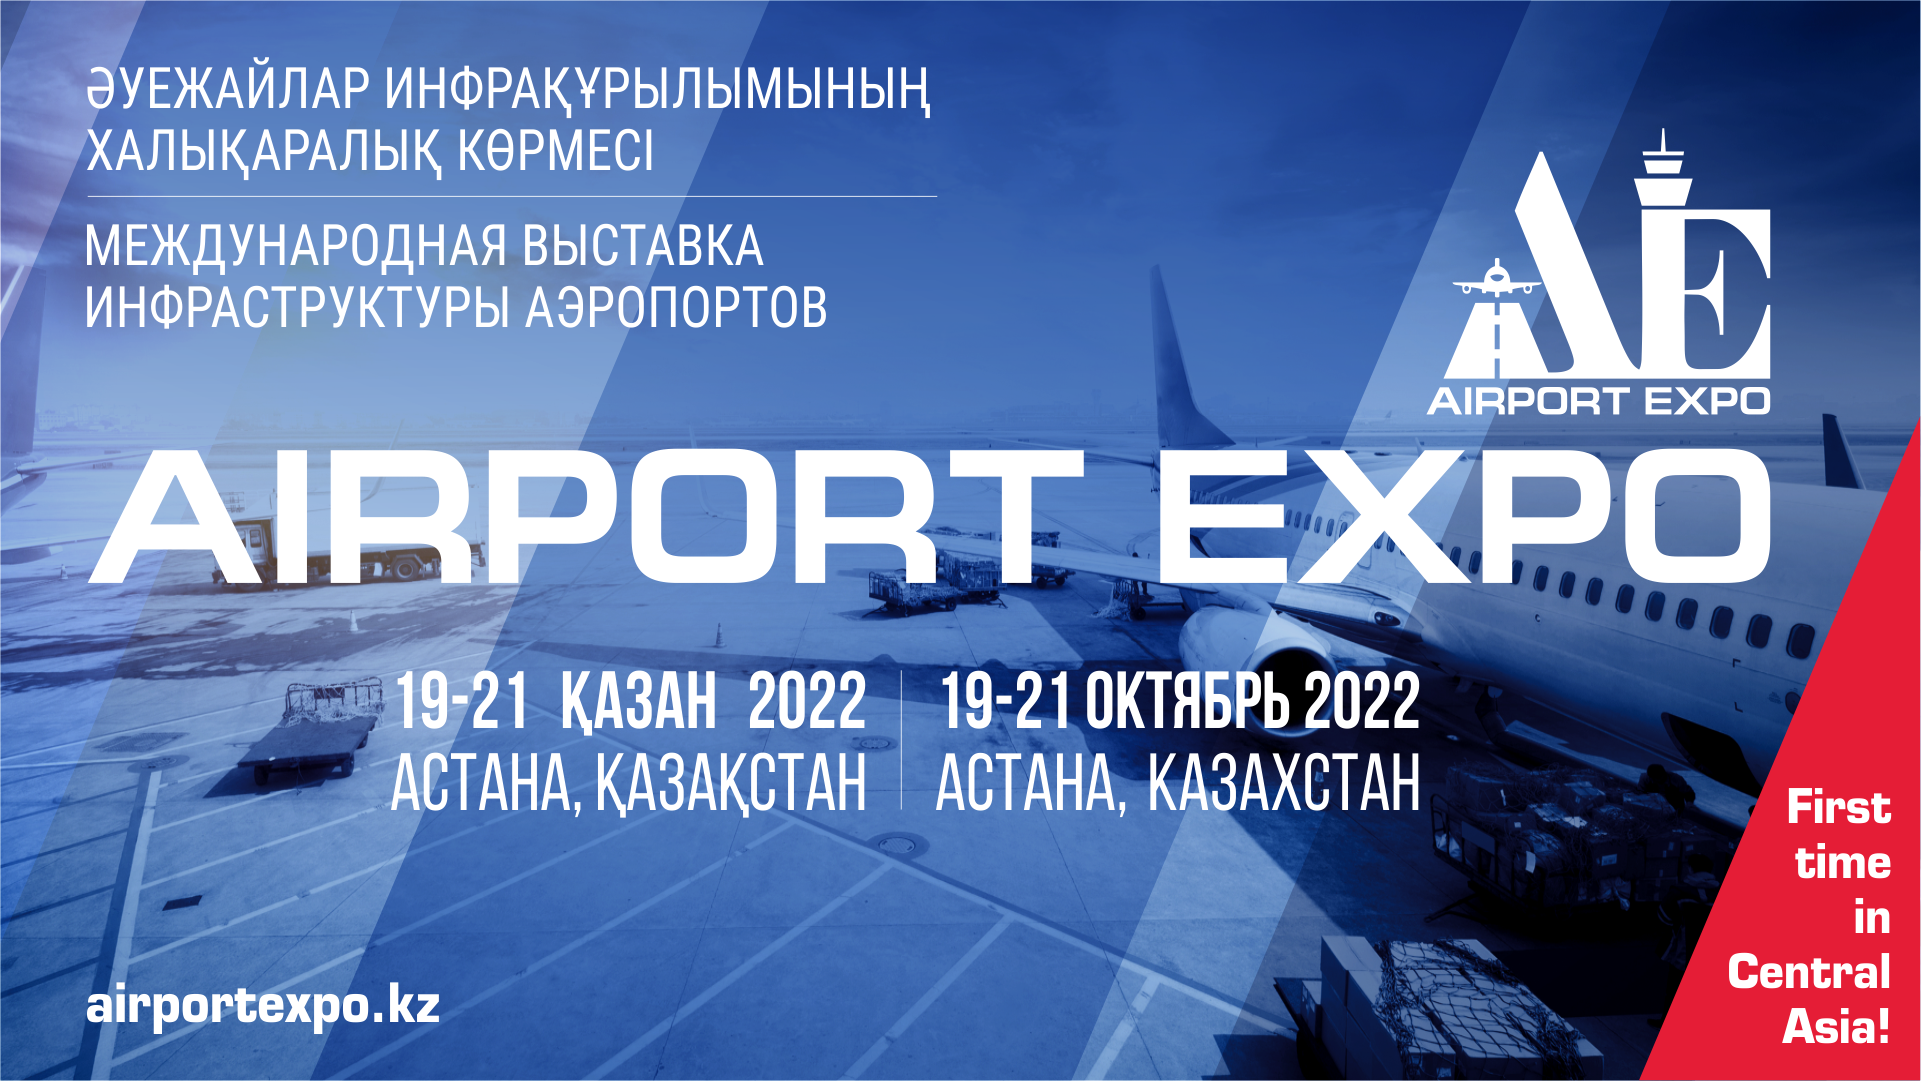 Airport Expo’2022 Exhibition will be held at the site of the EXPO IEC